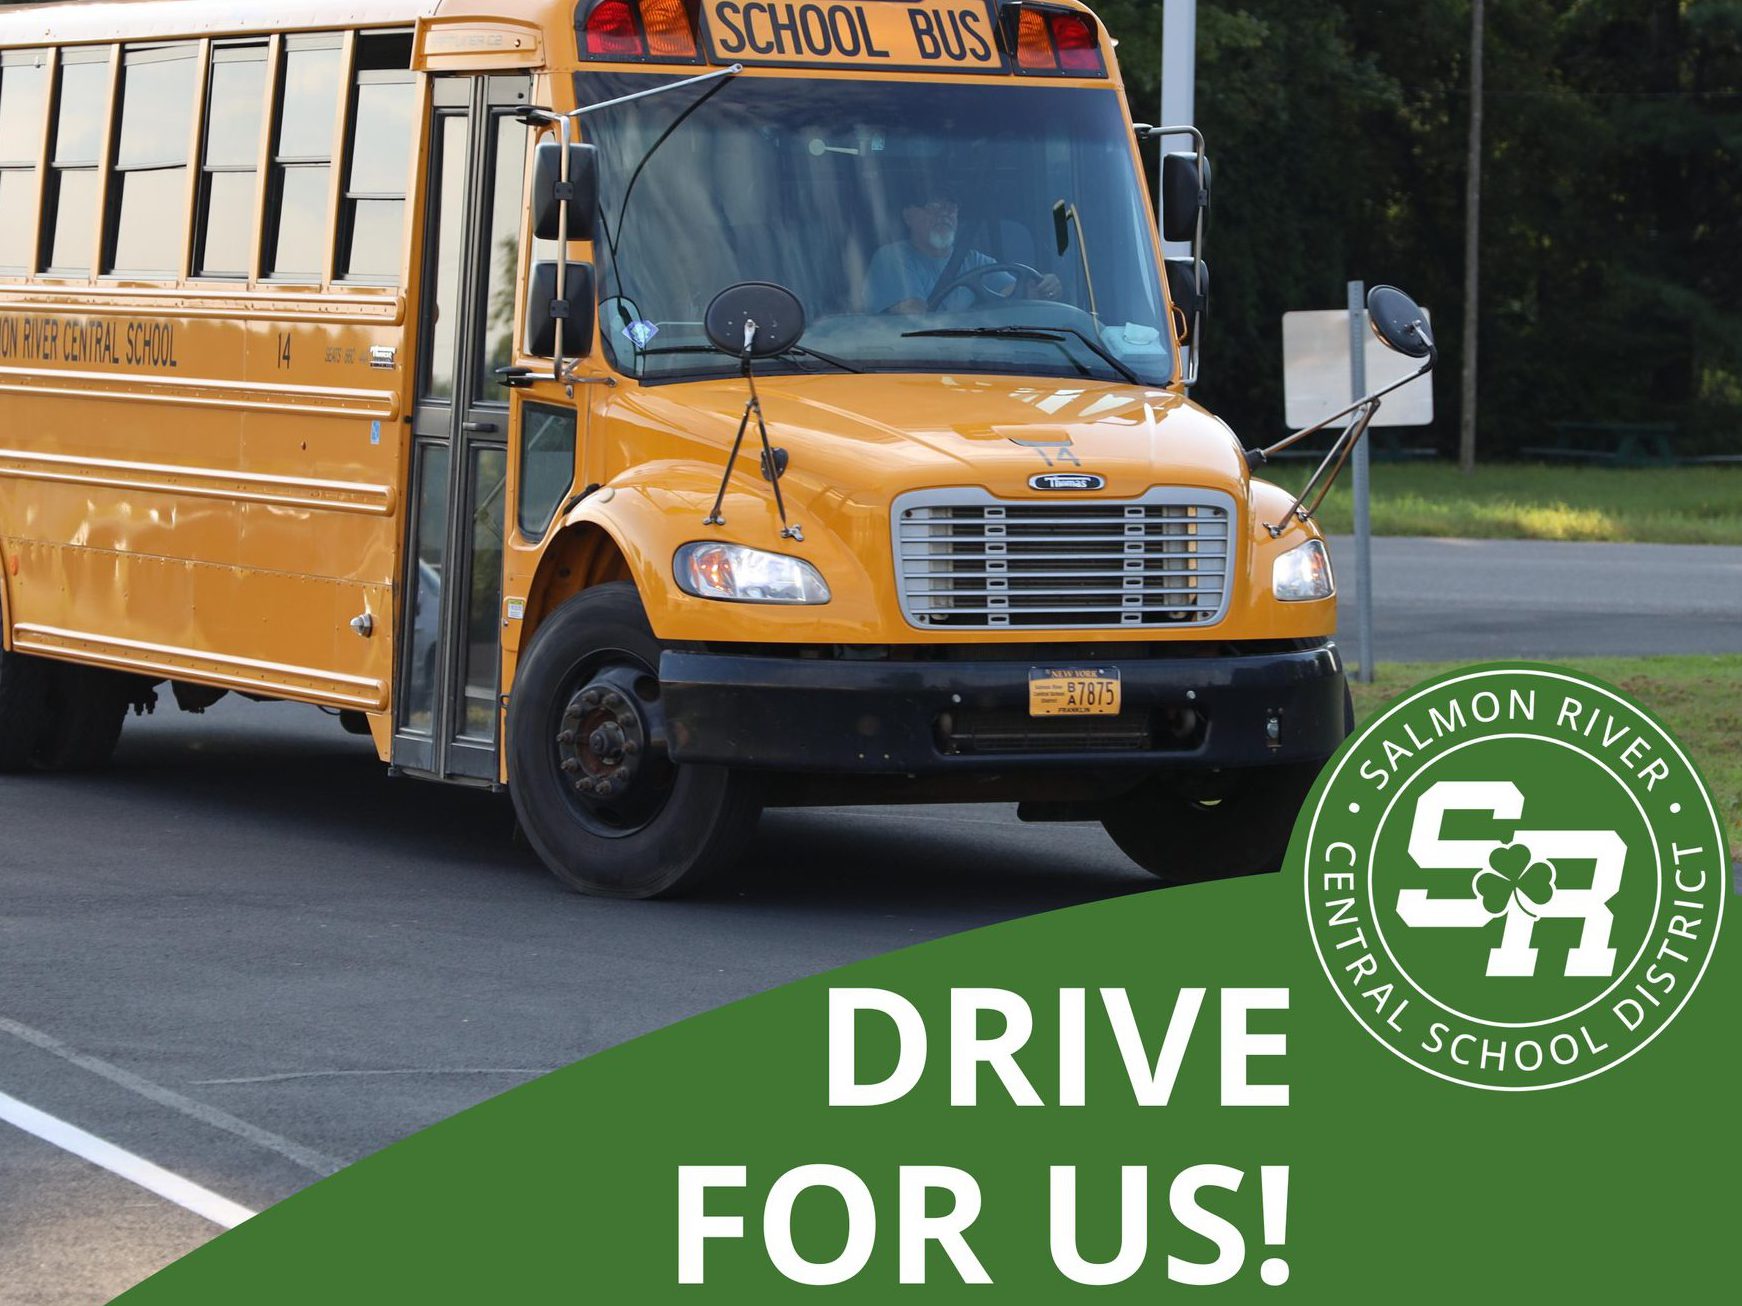 Image of bus with text: Drive for Us! Become a Bus Driver for Salmon River CSD